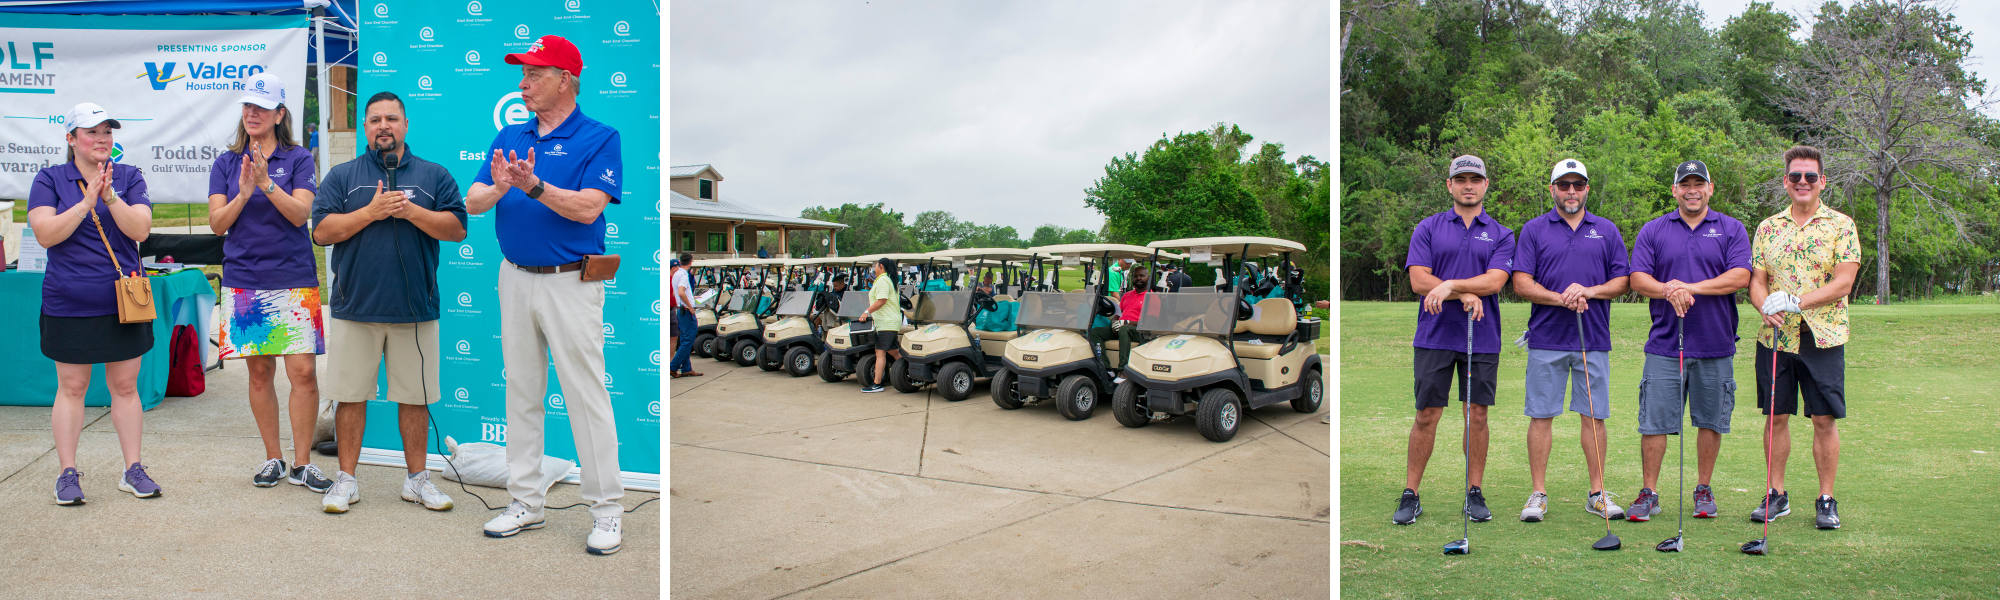 Image for Perfect Swing for Scholarships: Recap of 2022 East End Chamber Golf Tournament